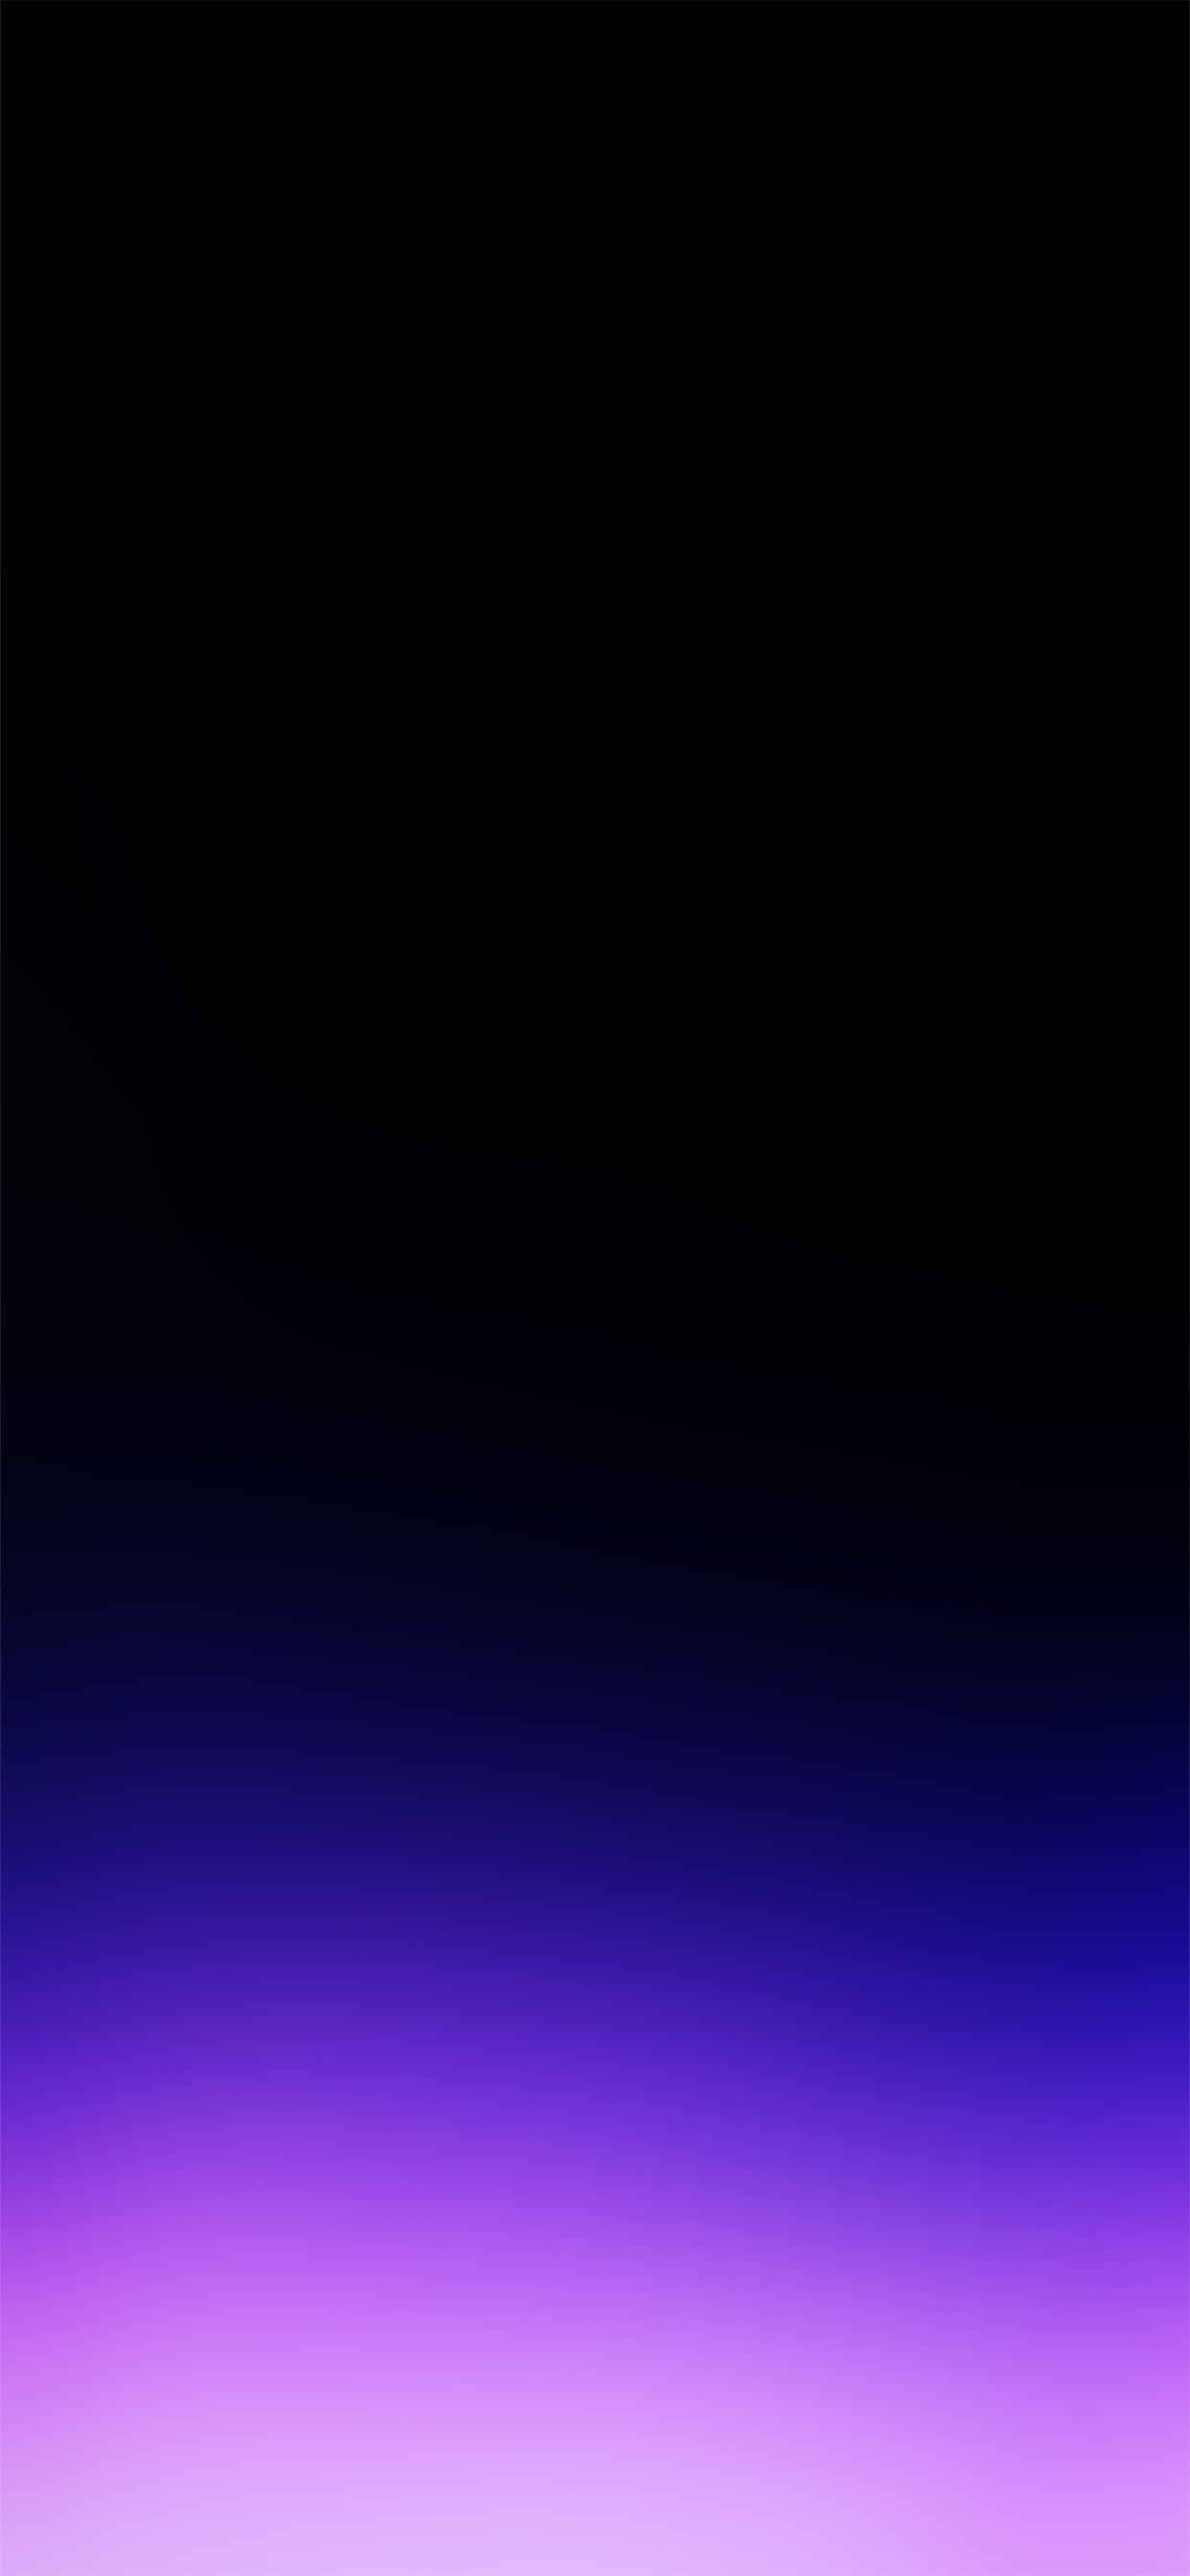 Black And Purple Iphone Wallpaper 81 Images